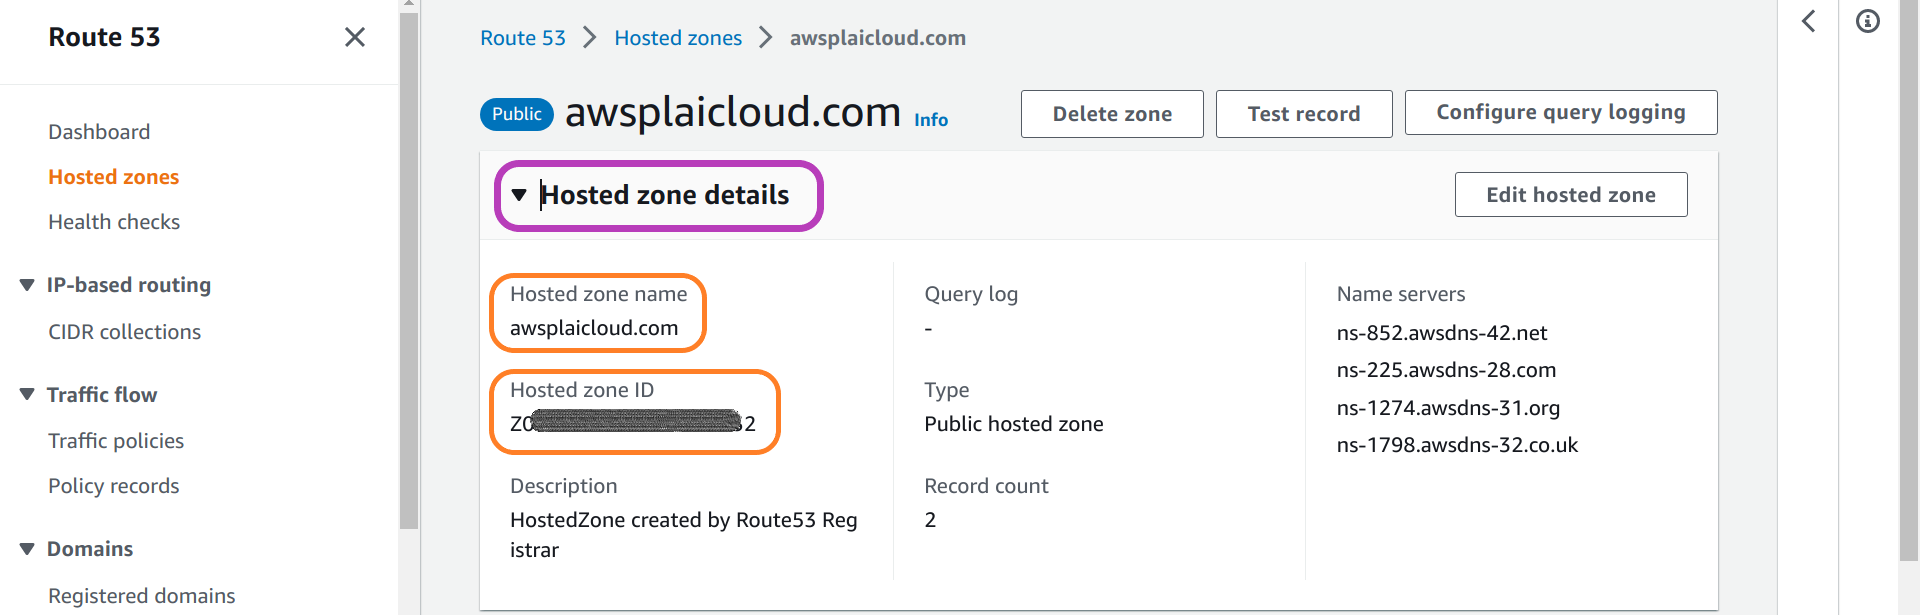 Screenshot of AWS Console "awsplaicloud.com" domain name page in a browser with the following items circled: above the middle to the right, the drop-down menu "Hosted zone details", in the midle the "Hosted zone name" and its value awsplaicloud.com, and below the "Hosted zone ID" with its value hidden.